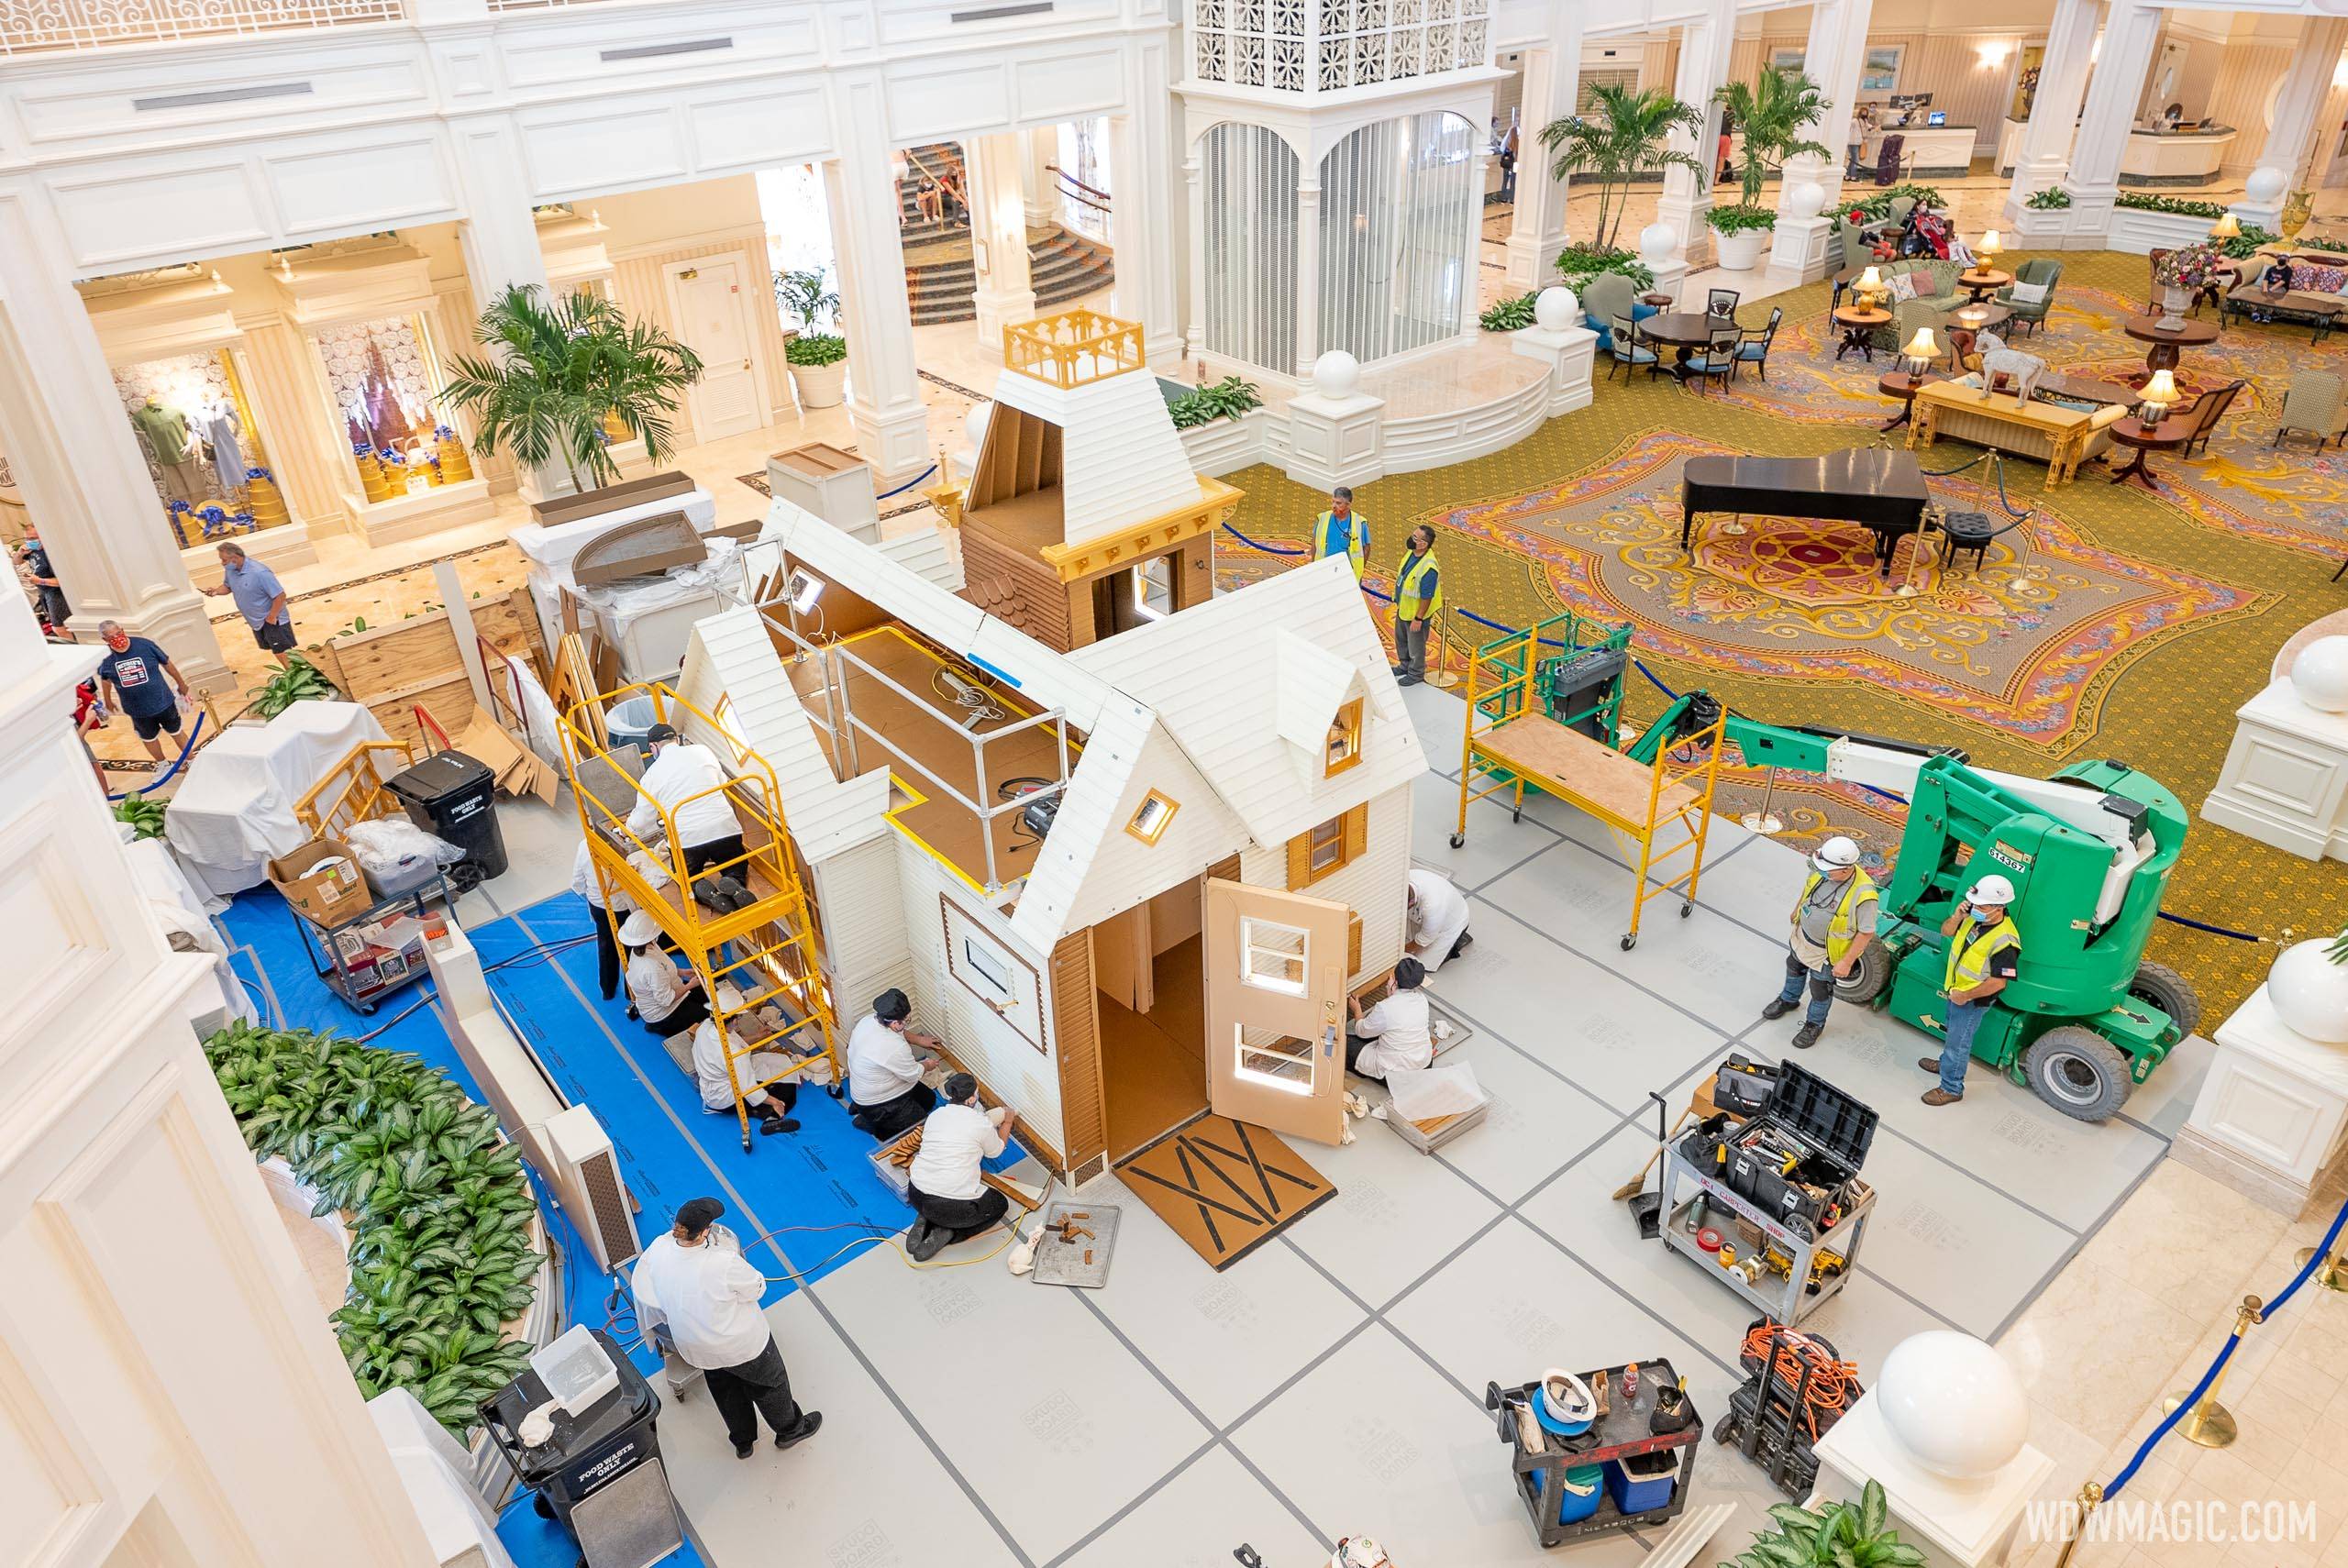 Building the 2021 Disney's Grand Floridian Resort Gingerbread House